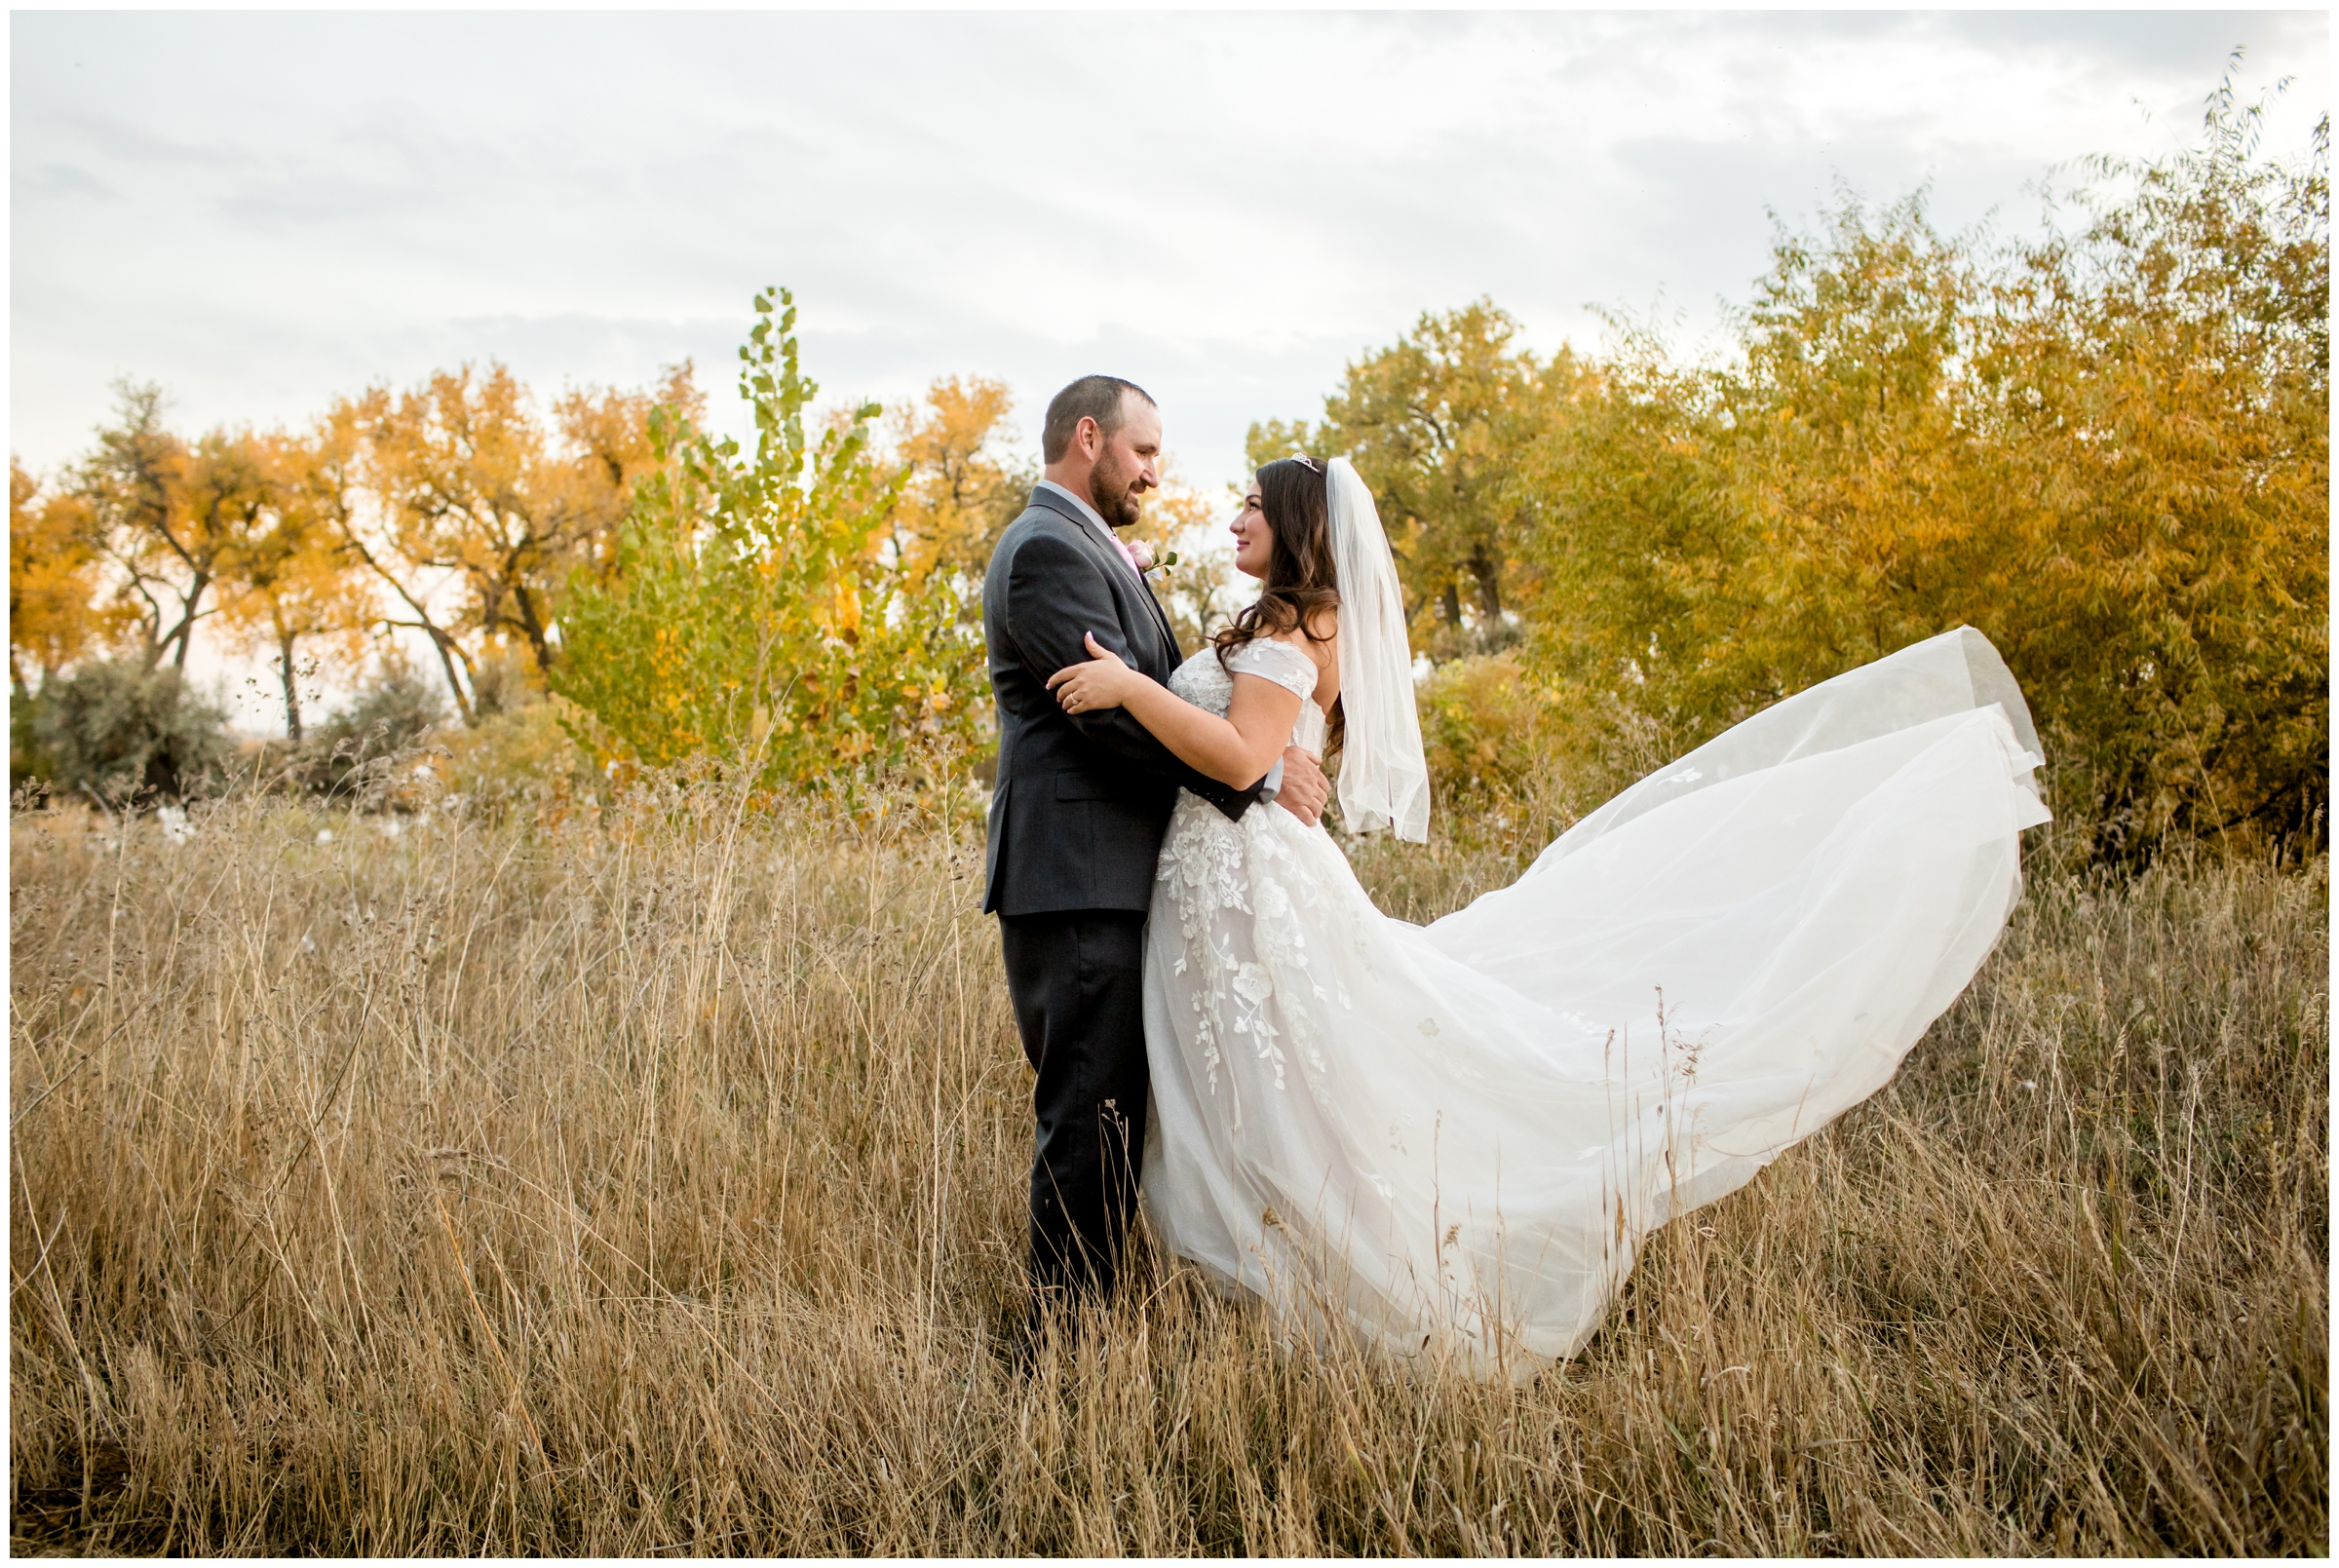 Rustic Colorado wedding photography inspiration by Platteville CO photographer Plum Pretty Photography